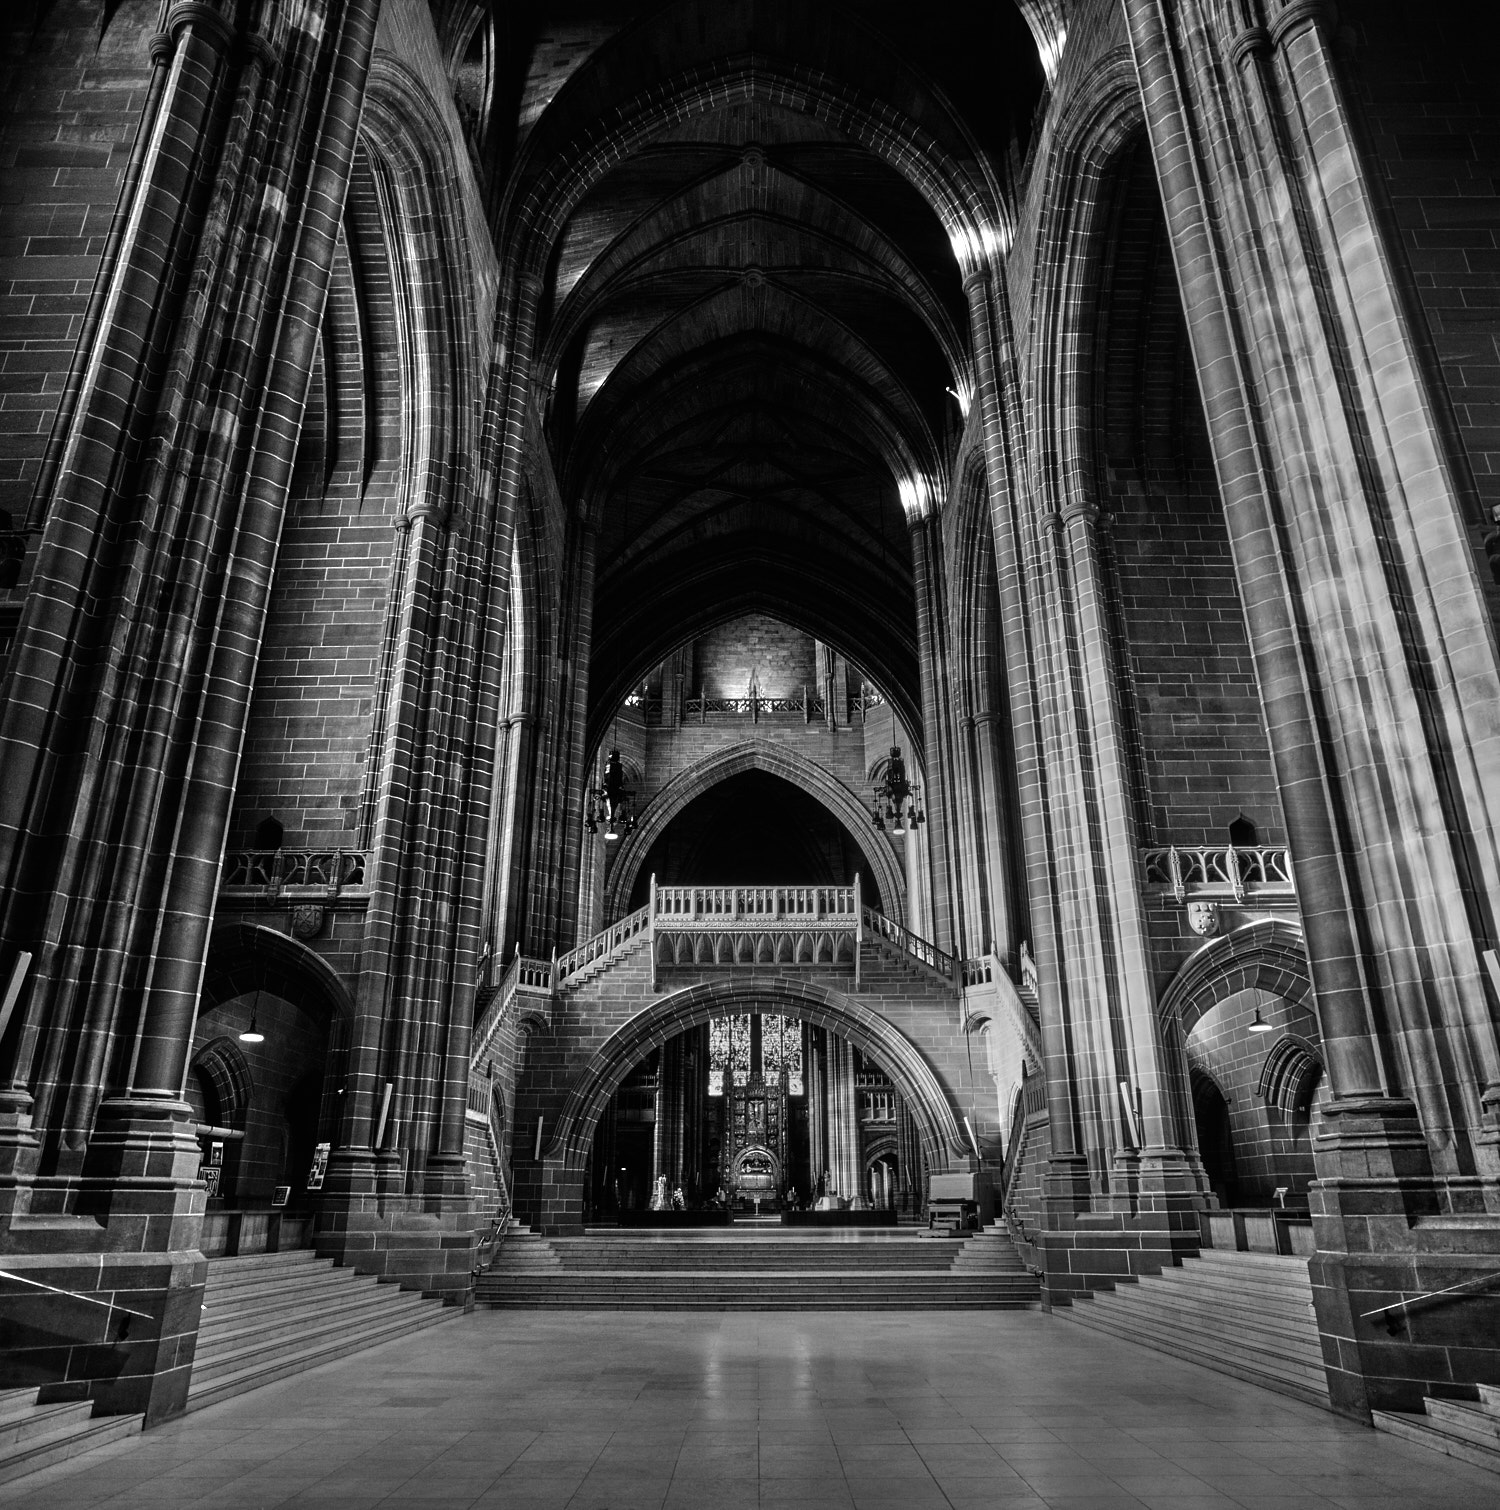 Liverpool Cathedral interior, viewed from the west end